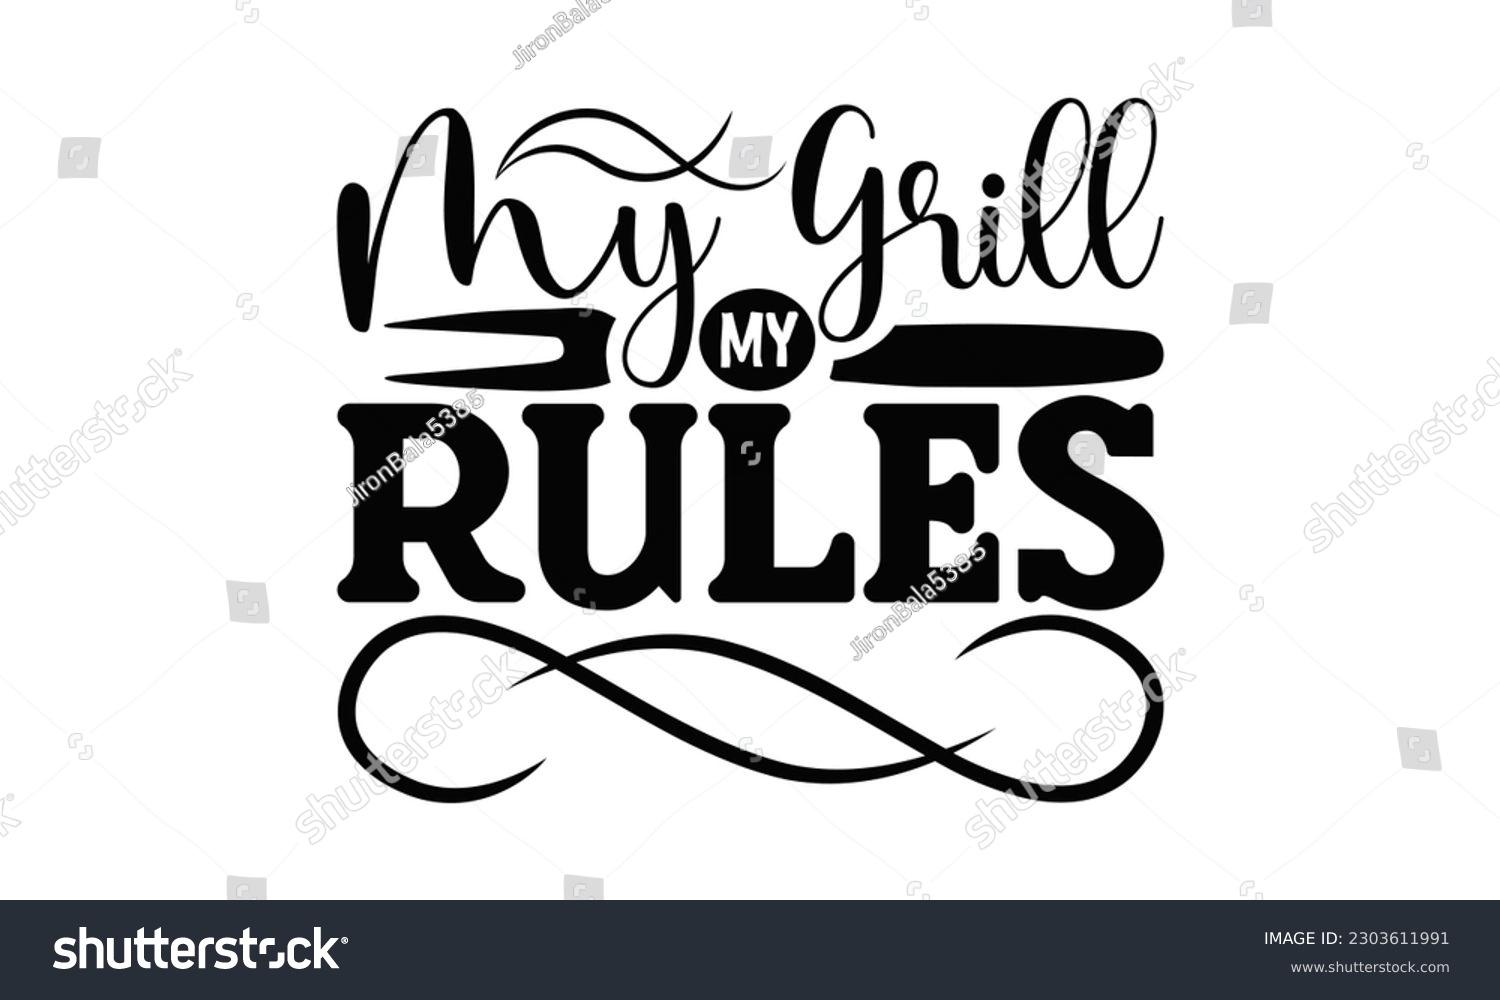 SVG of My Grill My Rules - Barbecue SVG Design, Calligraphy t shirt design, Illustration for prints on t-shirts, bags, posters, cards and Mug.
 svg